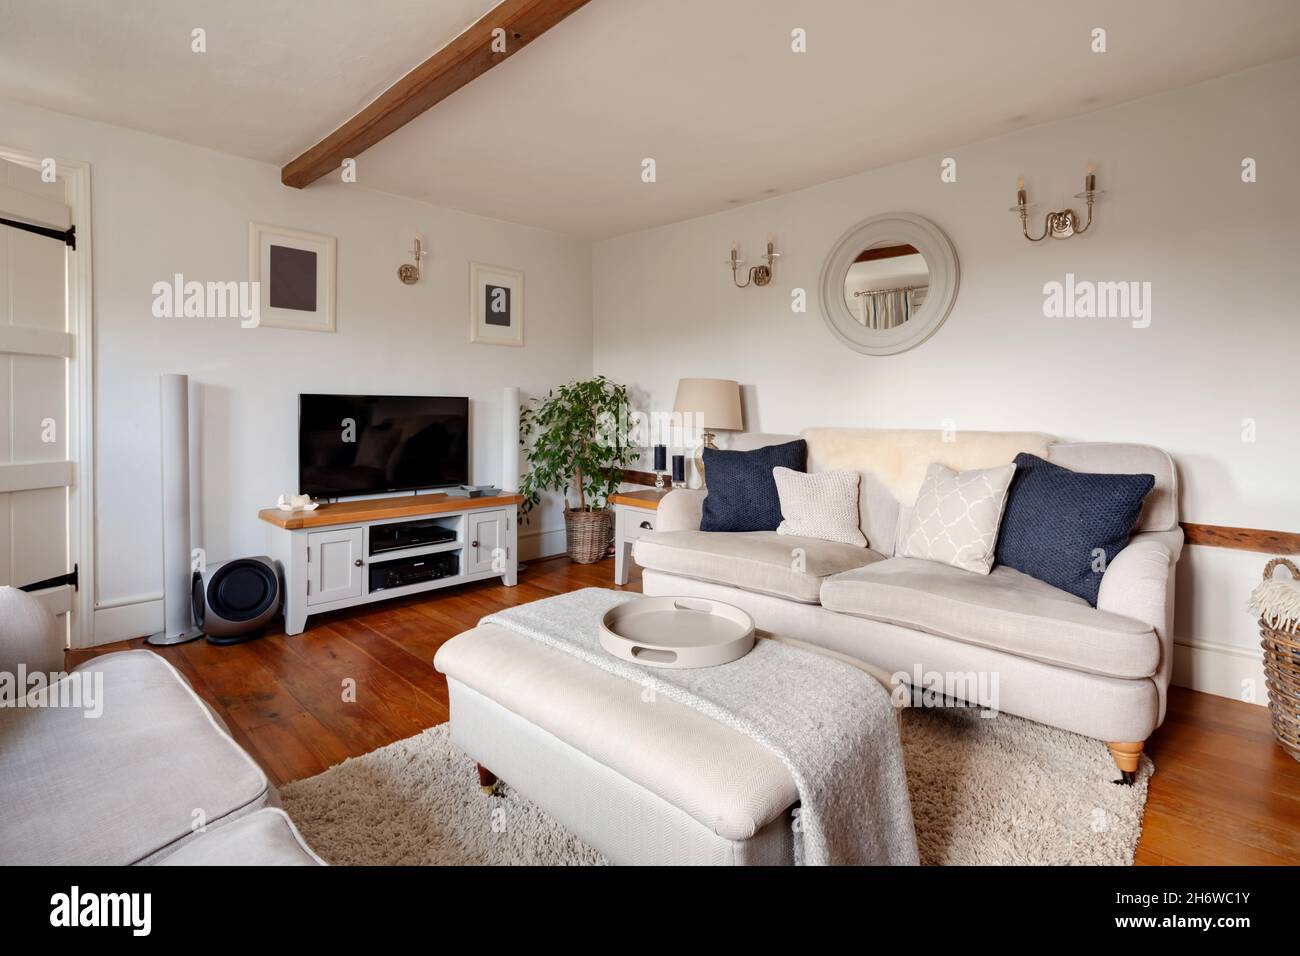 Calford Green, Suffolk, England - January 17 2020: Fully furnished cottage living room Stock Photo